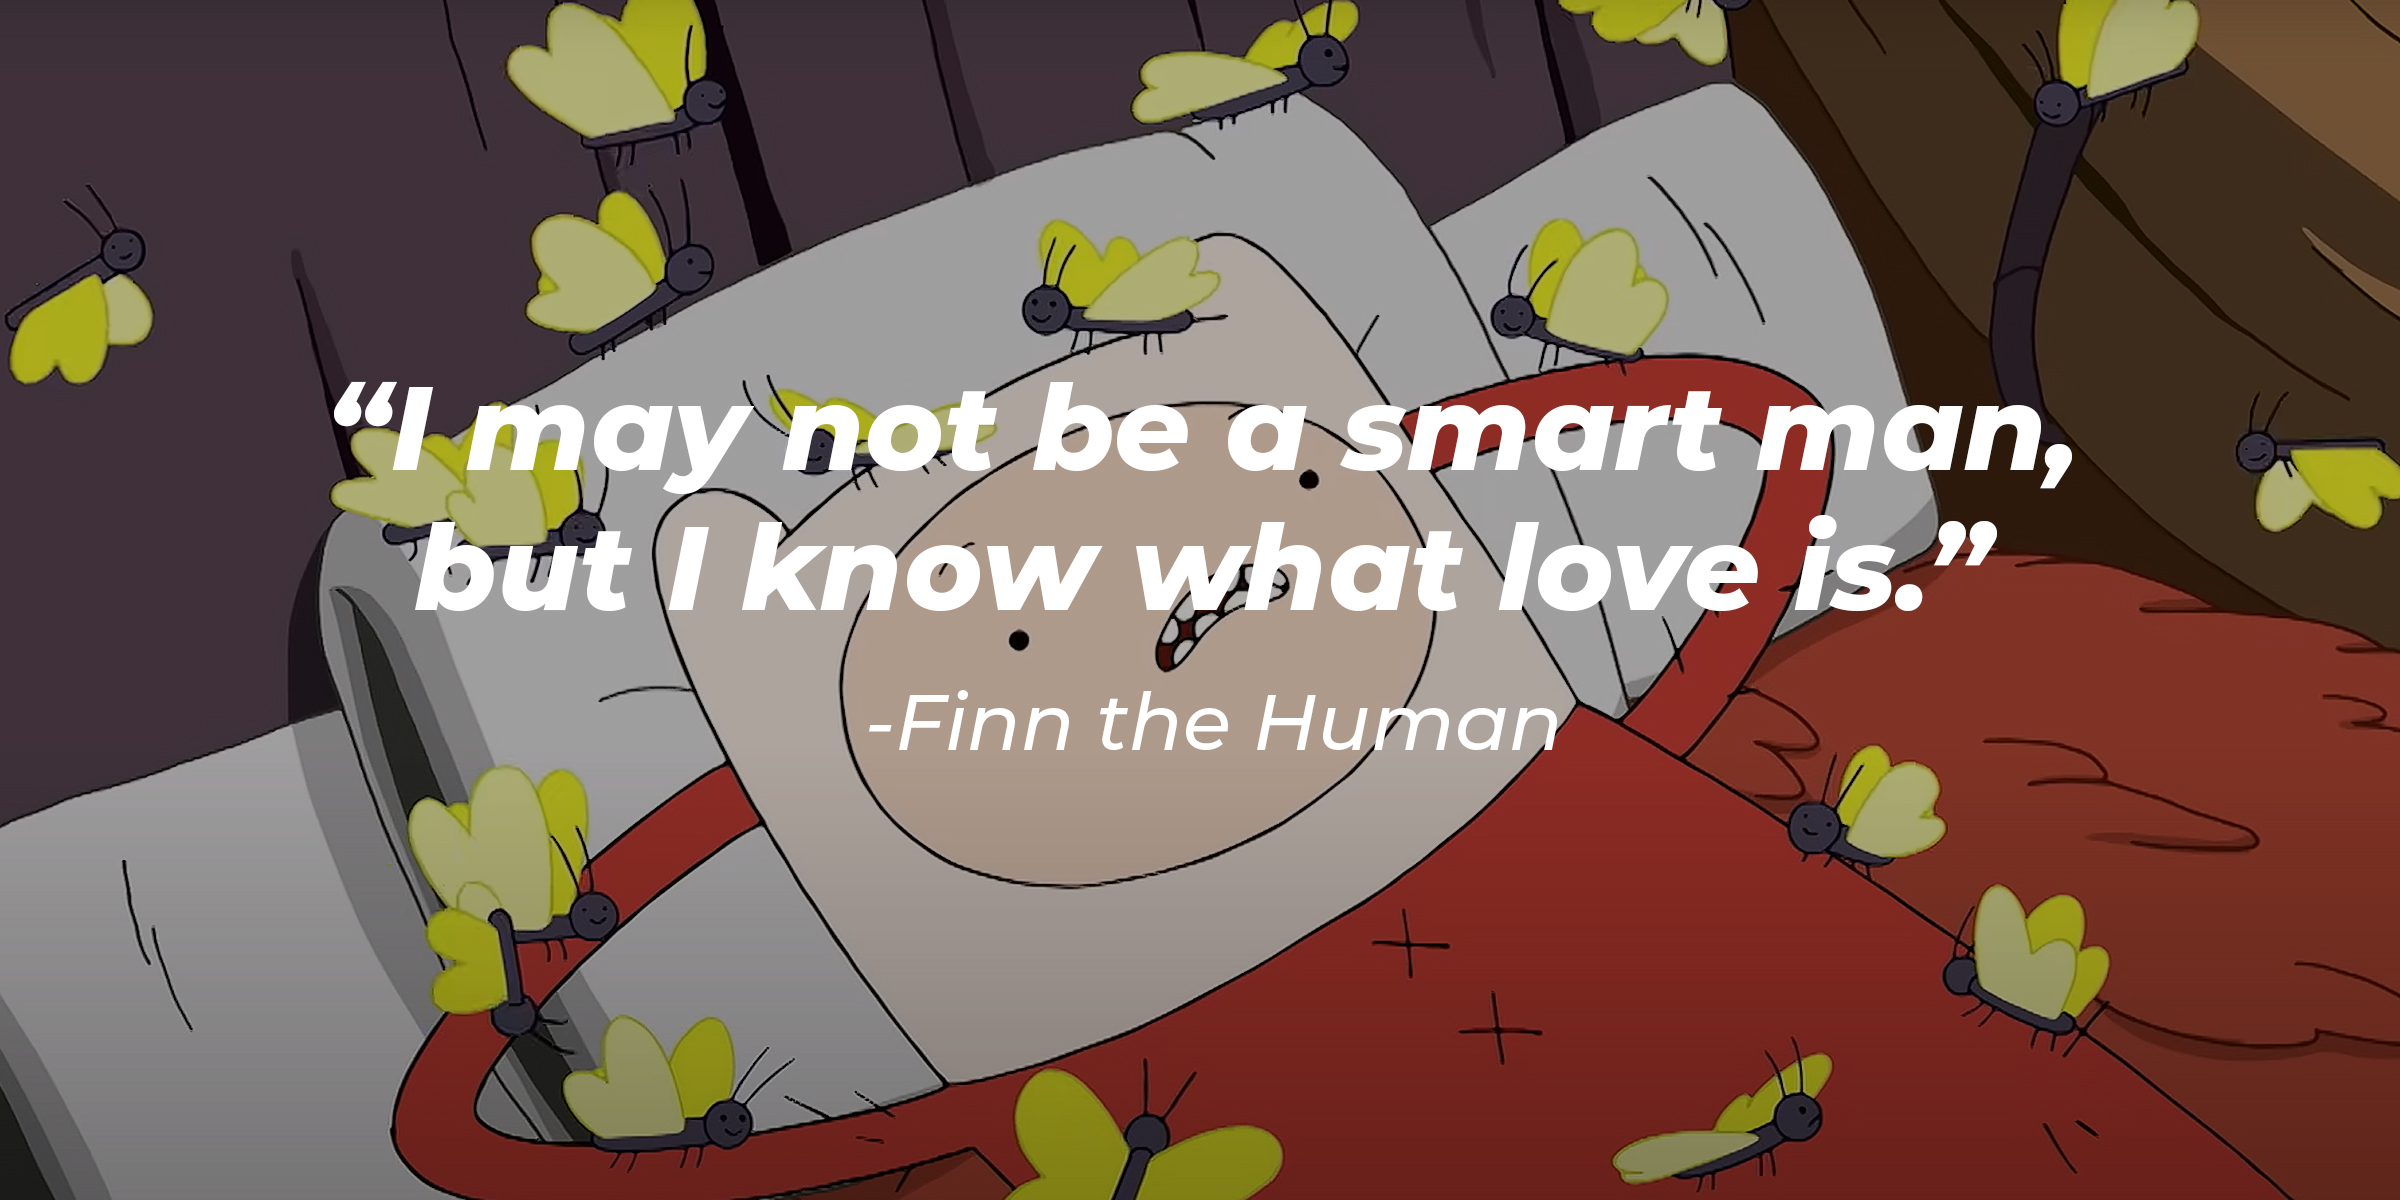 An image of Finn the Human, with his quote: "I may not be a smart man, but I know what love is.” | Source: Facebook.com/adventuretime